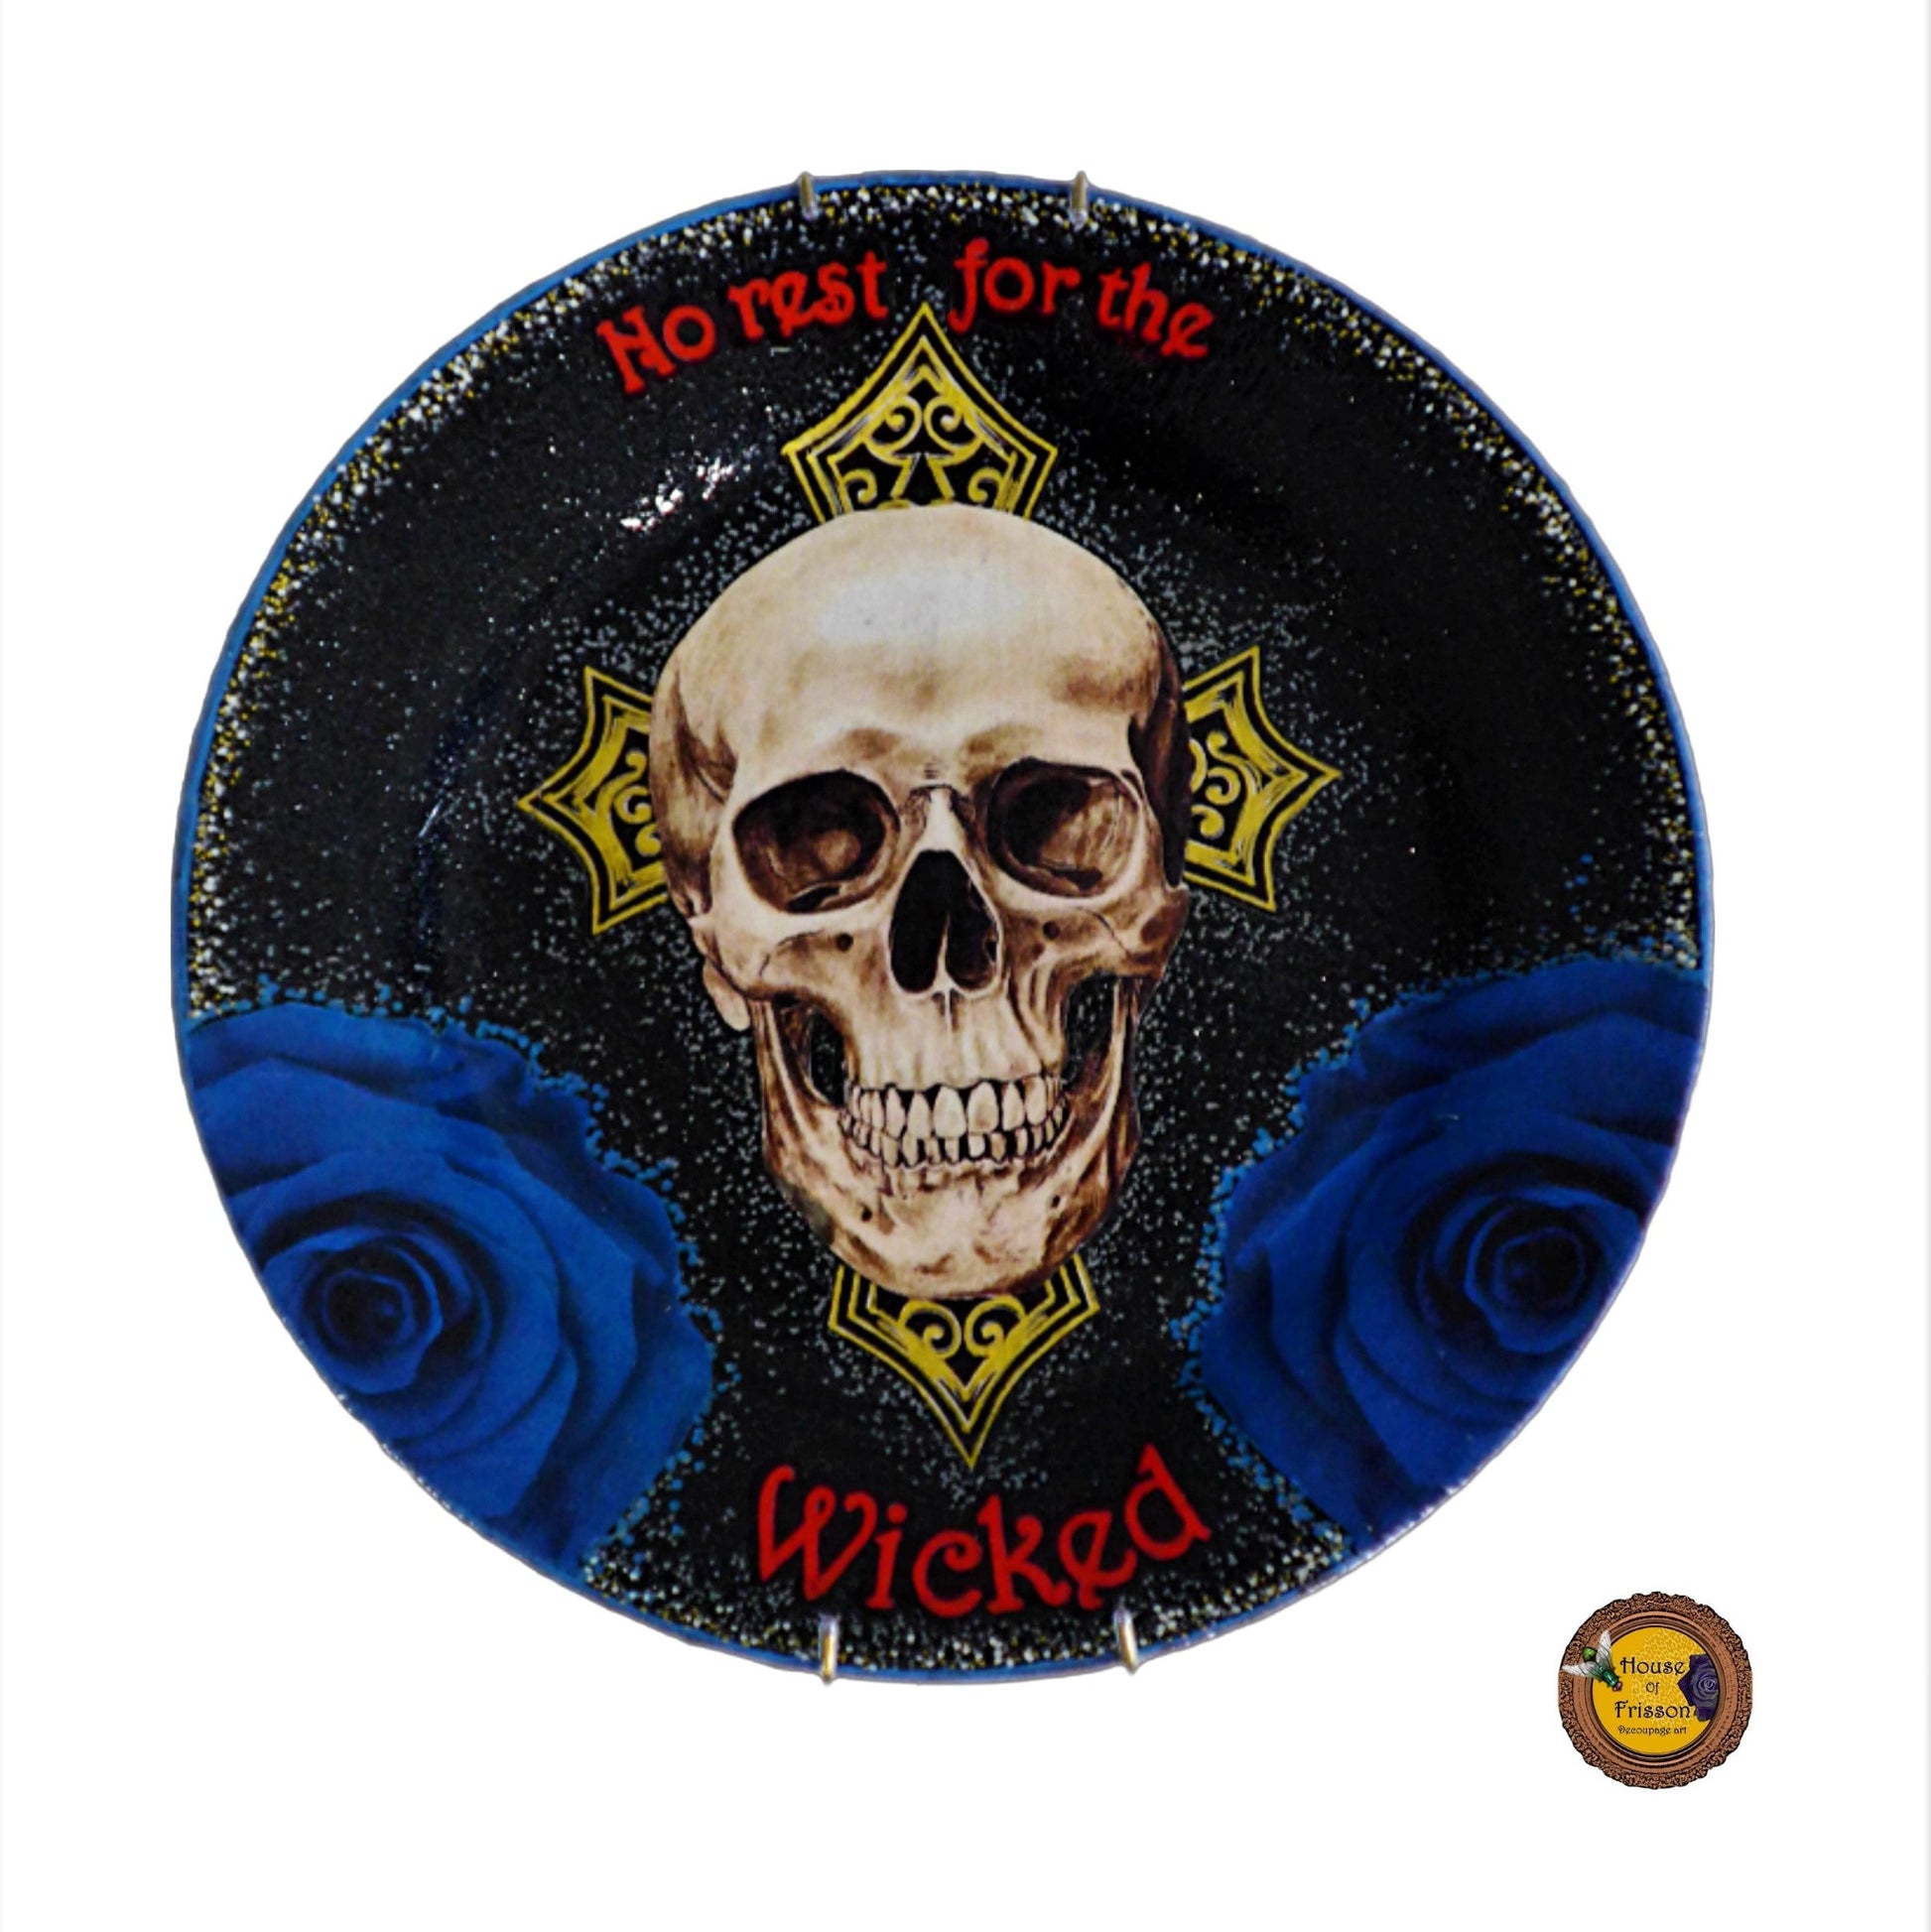 House of Frisson "No Rest For The Wicked" Black Wall Plate front. Collage artwork featuring a skull, a cross, and blue roses, on a black background.